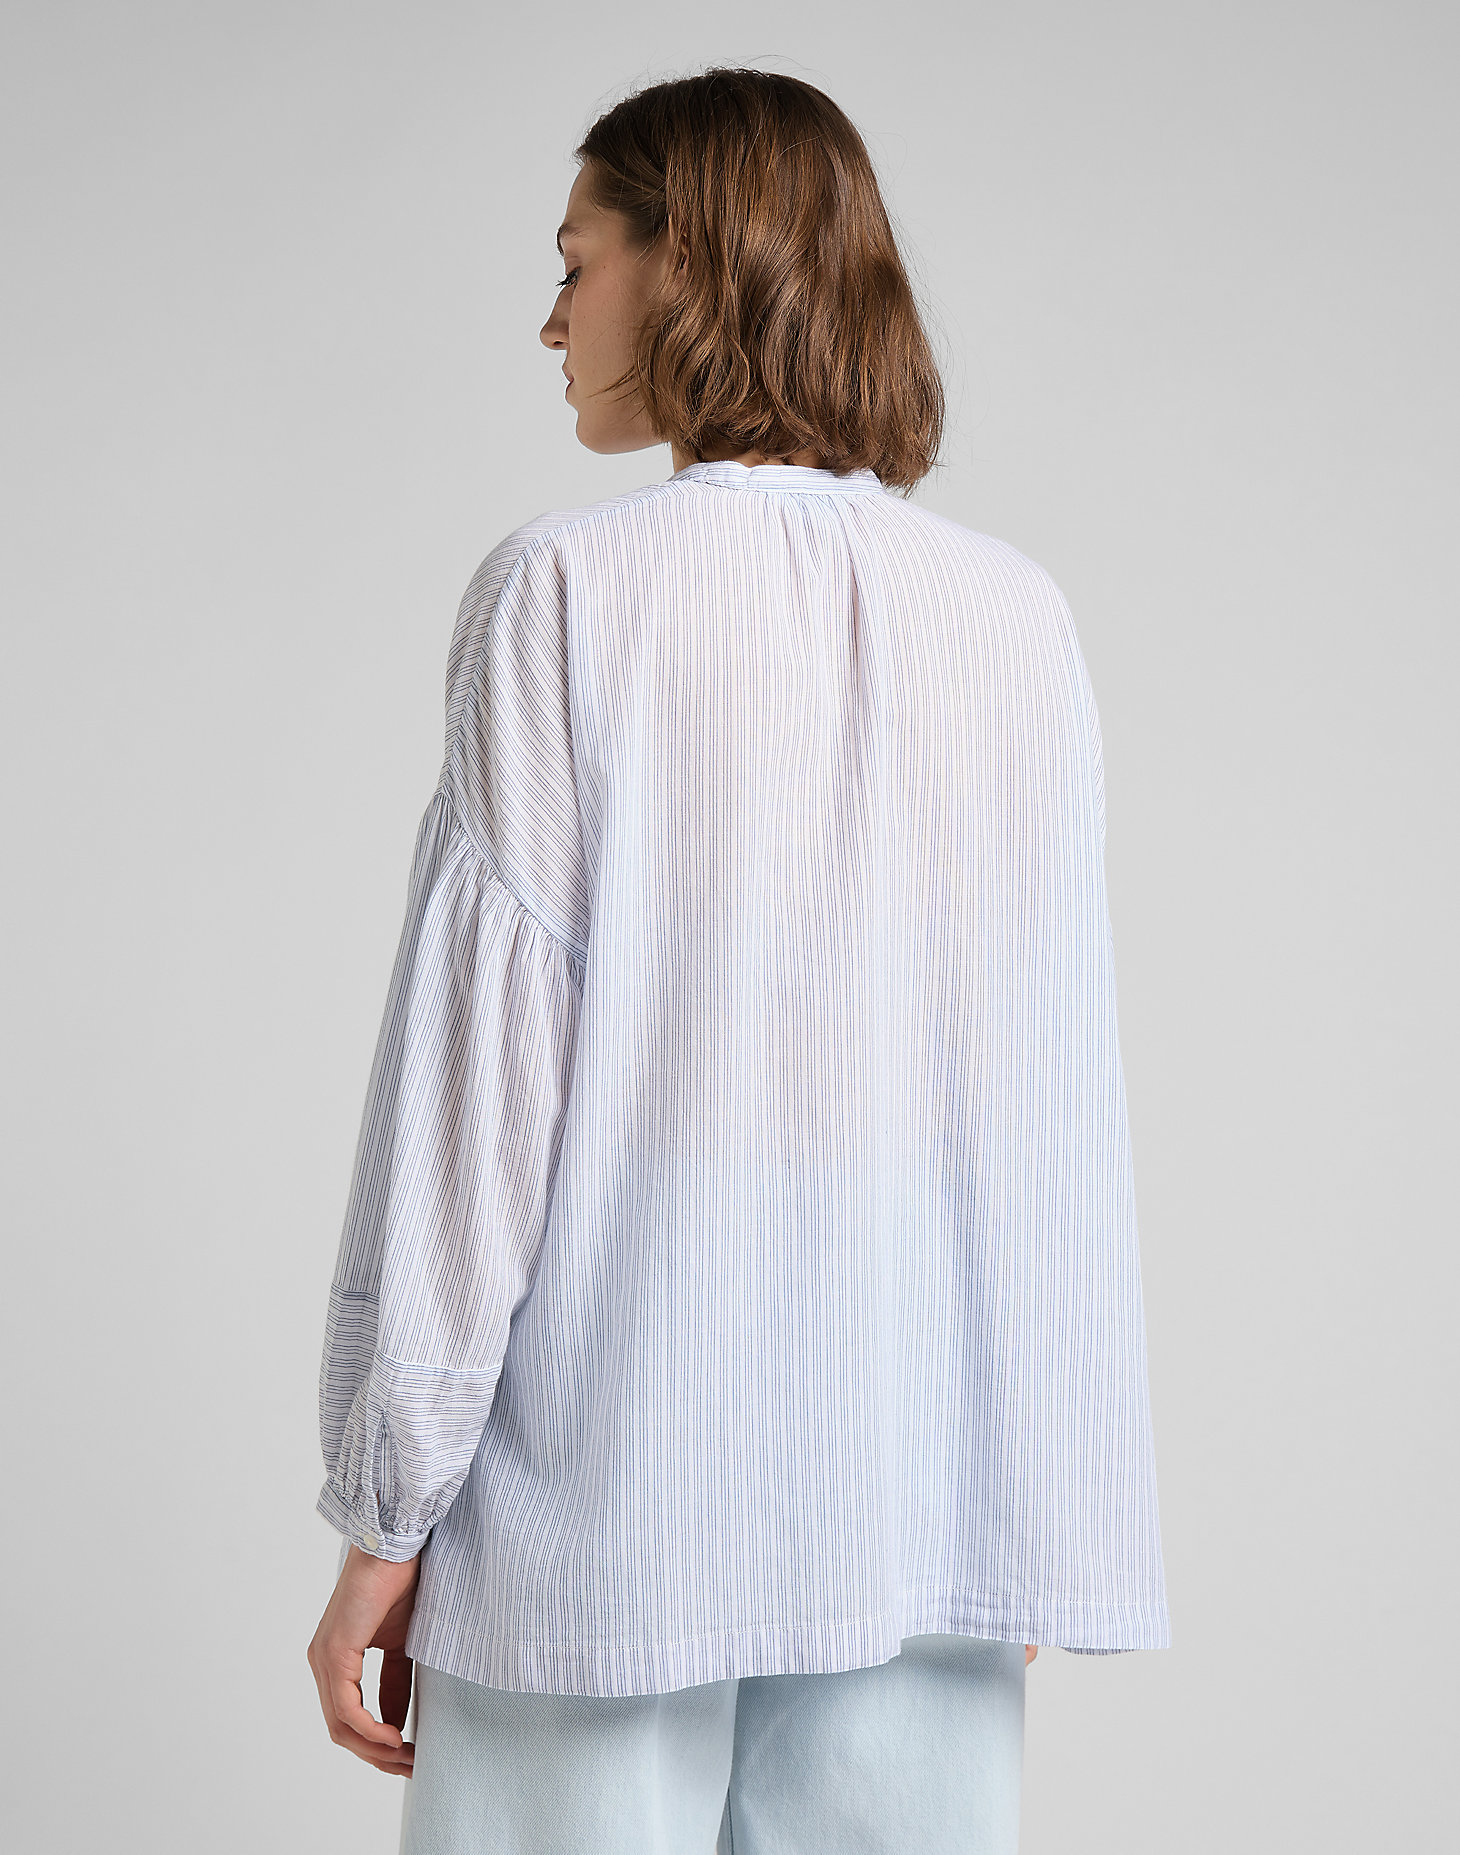 Relaxed Blouse in Bright White alternative view 1